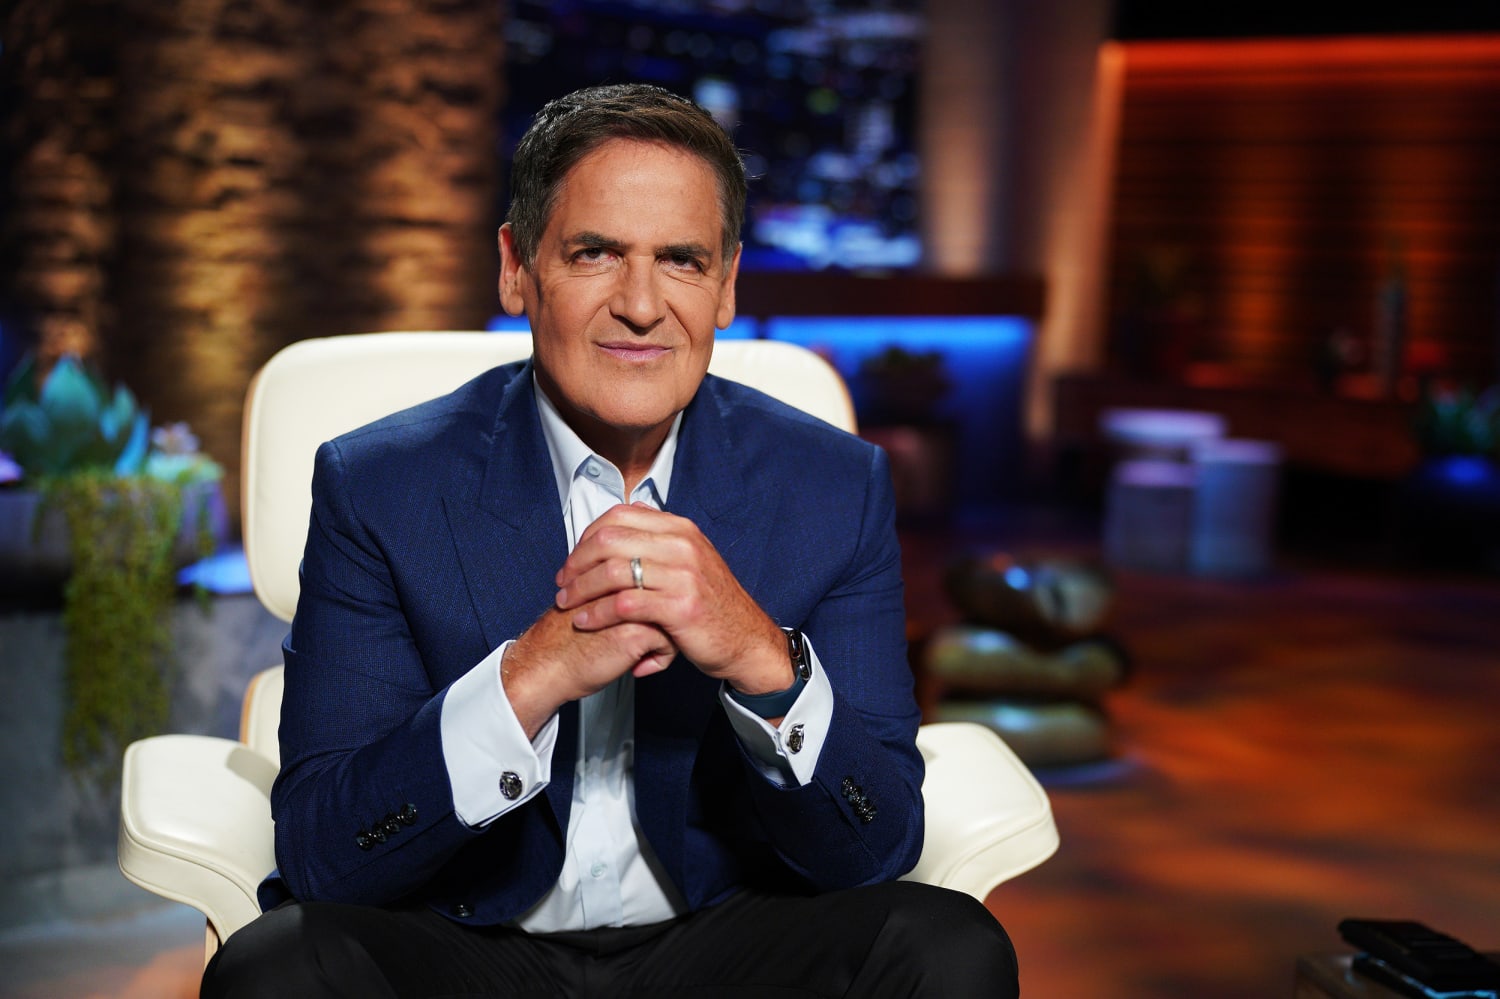 Shark Tank' star Mark Cuban to leave show after 'one more year,' he says